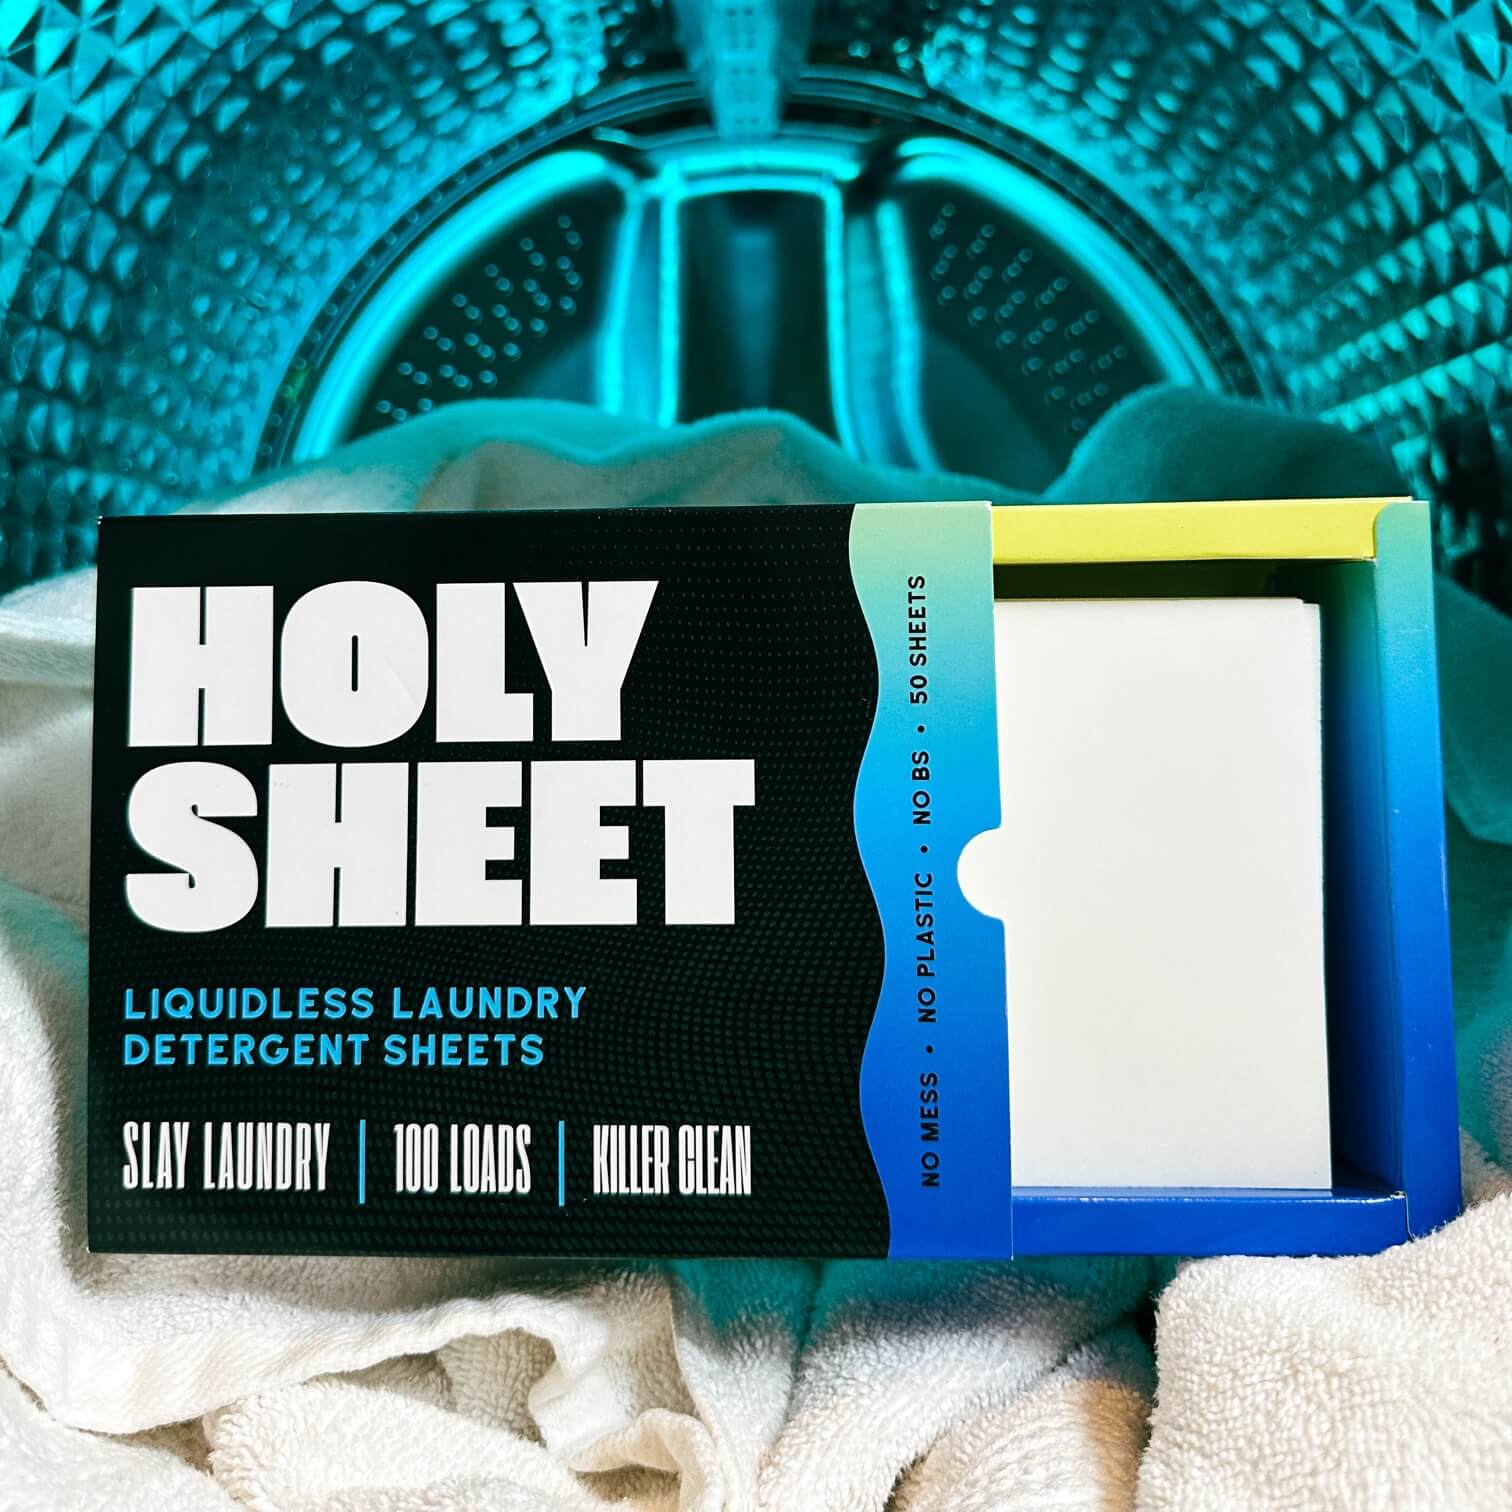 Holy Sheet Detergent Sheets